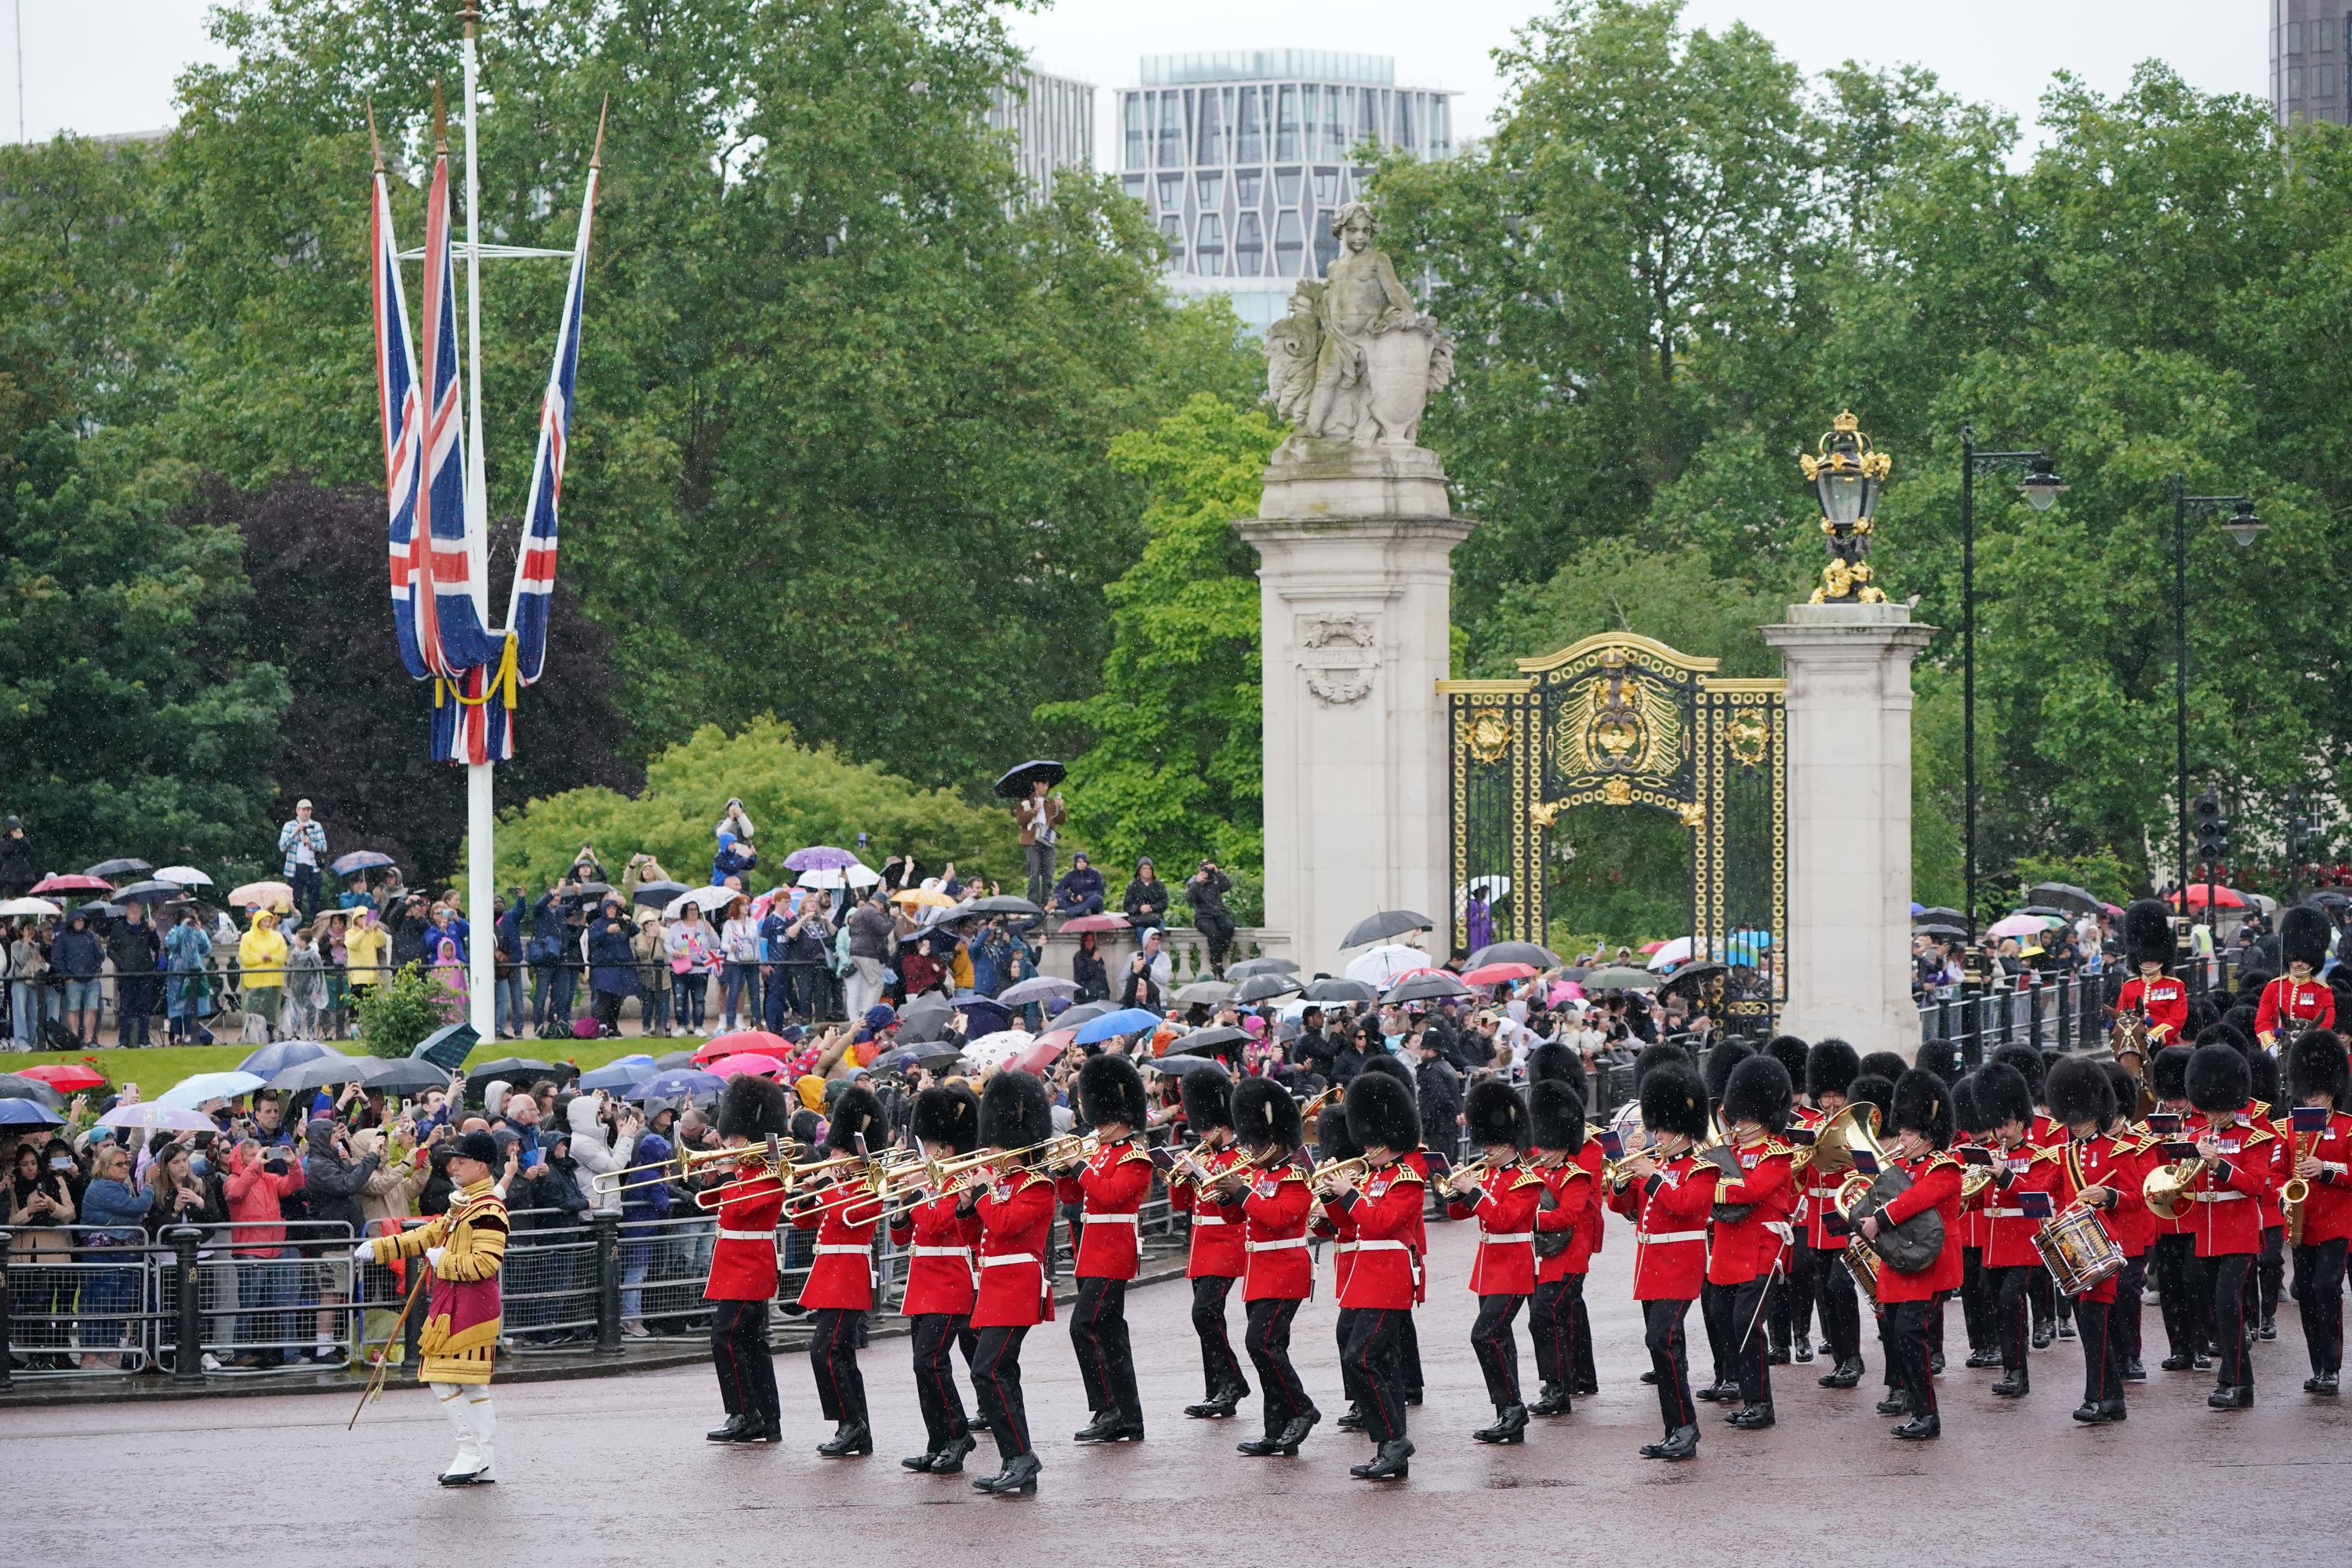 The Band of Grenadier Guards marches along The Mall towards Horse Guards Parade